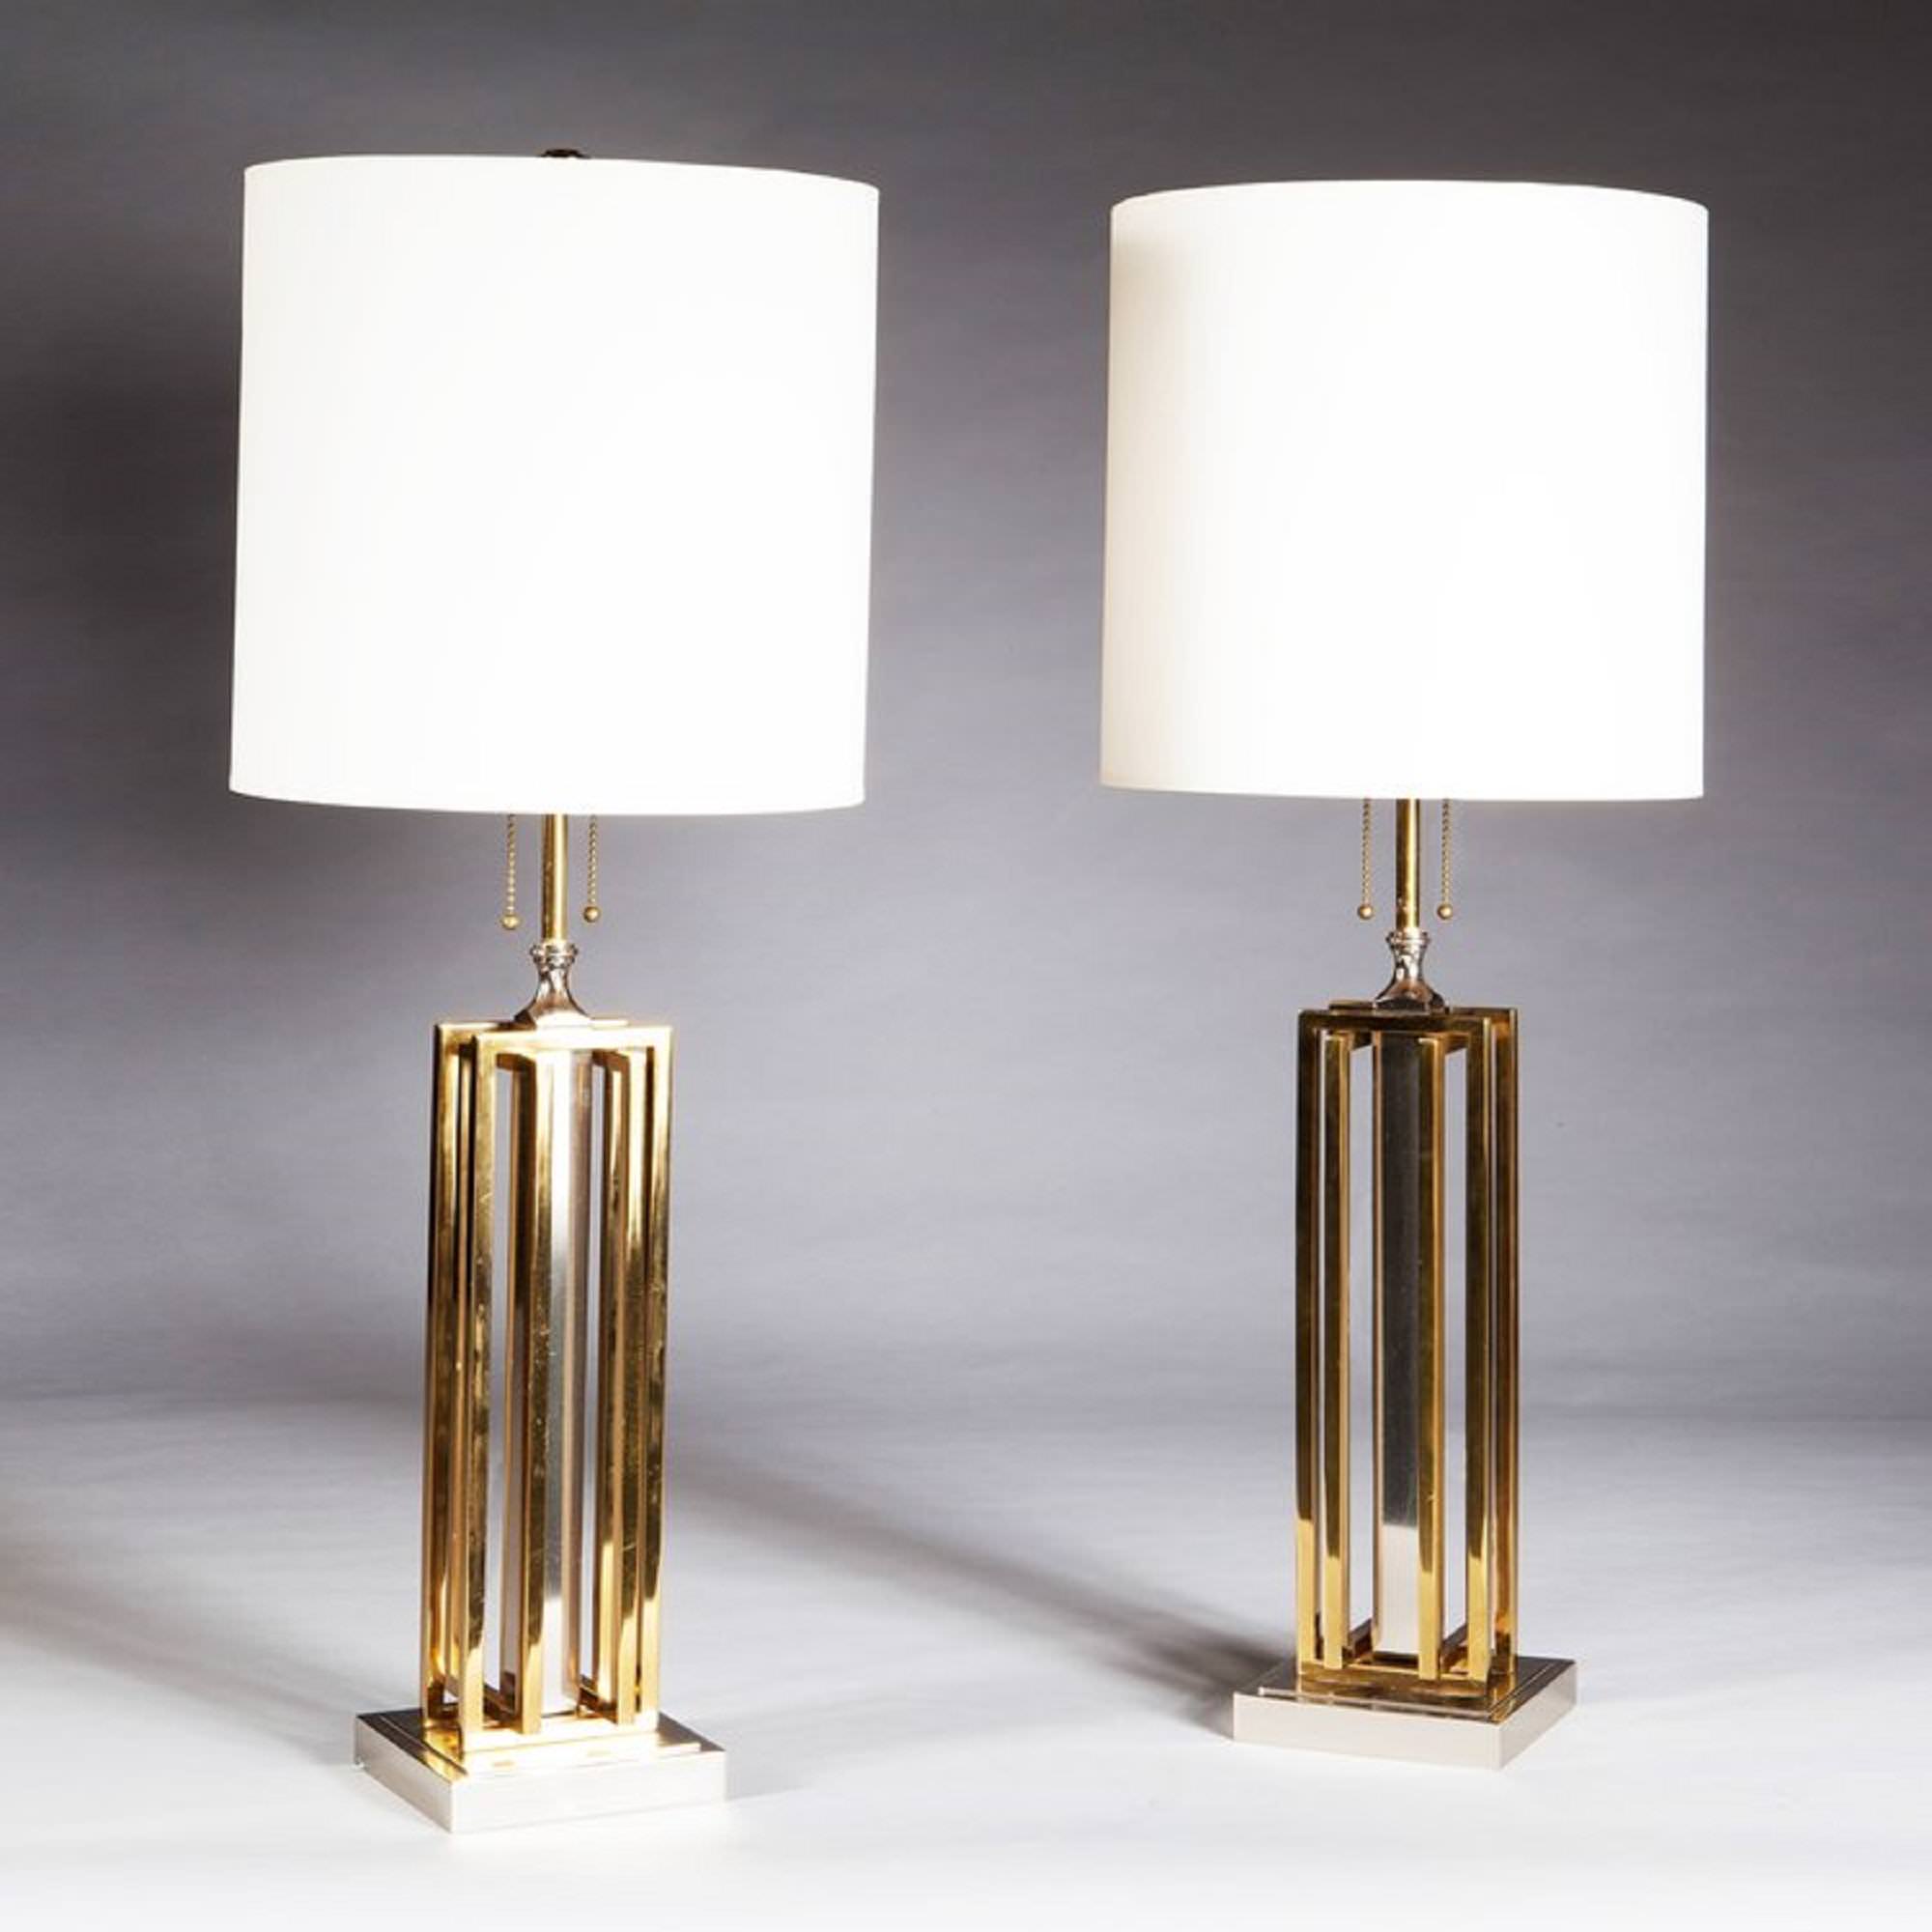 A Pair Of Willy Daro Lamps - Nicholas Wells Antiques Ltd ...